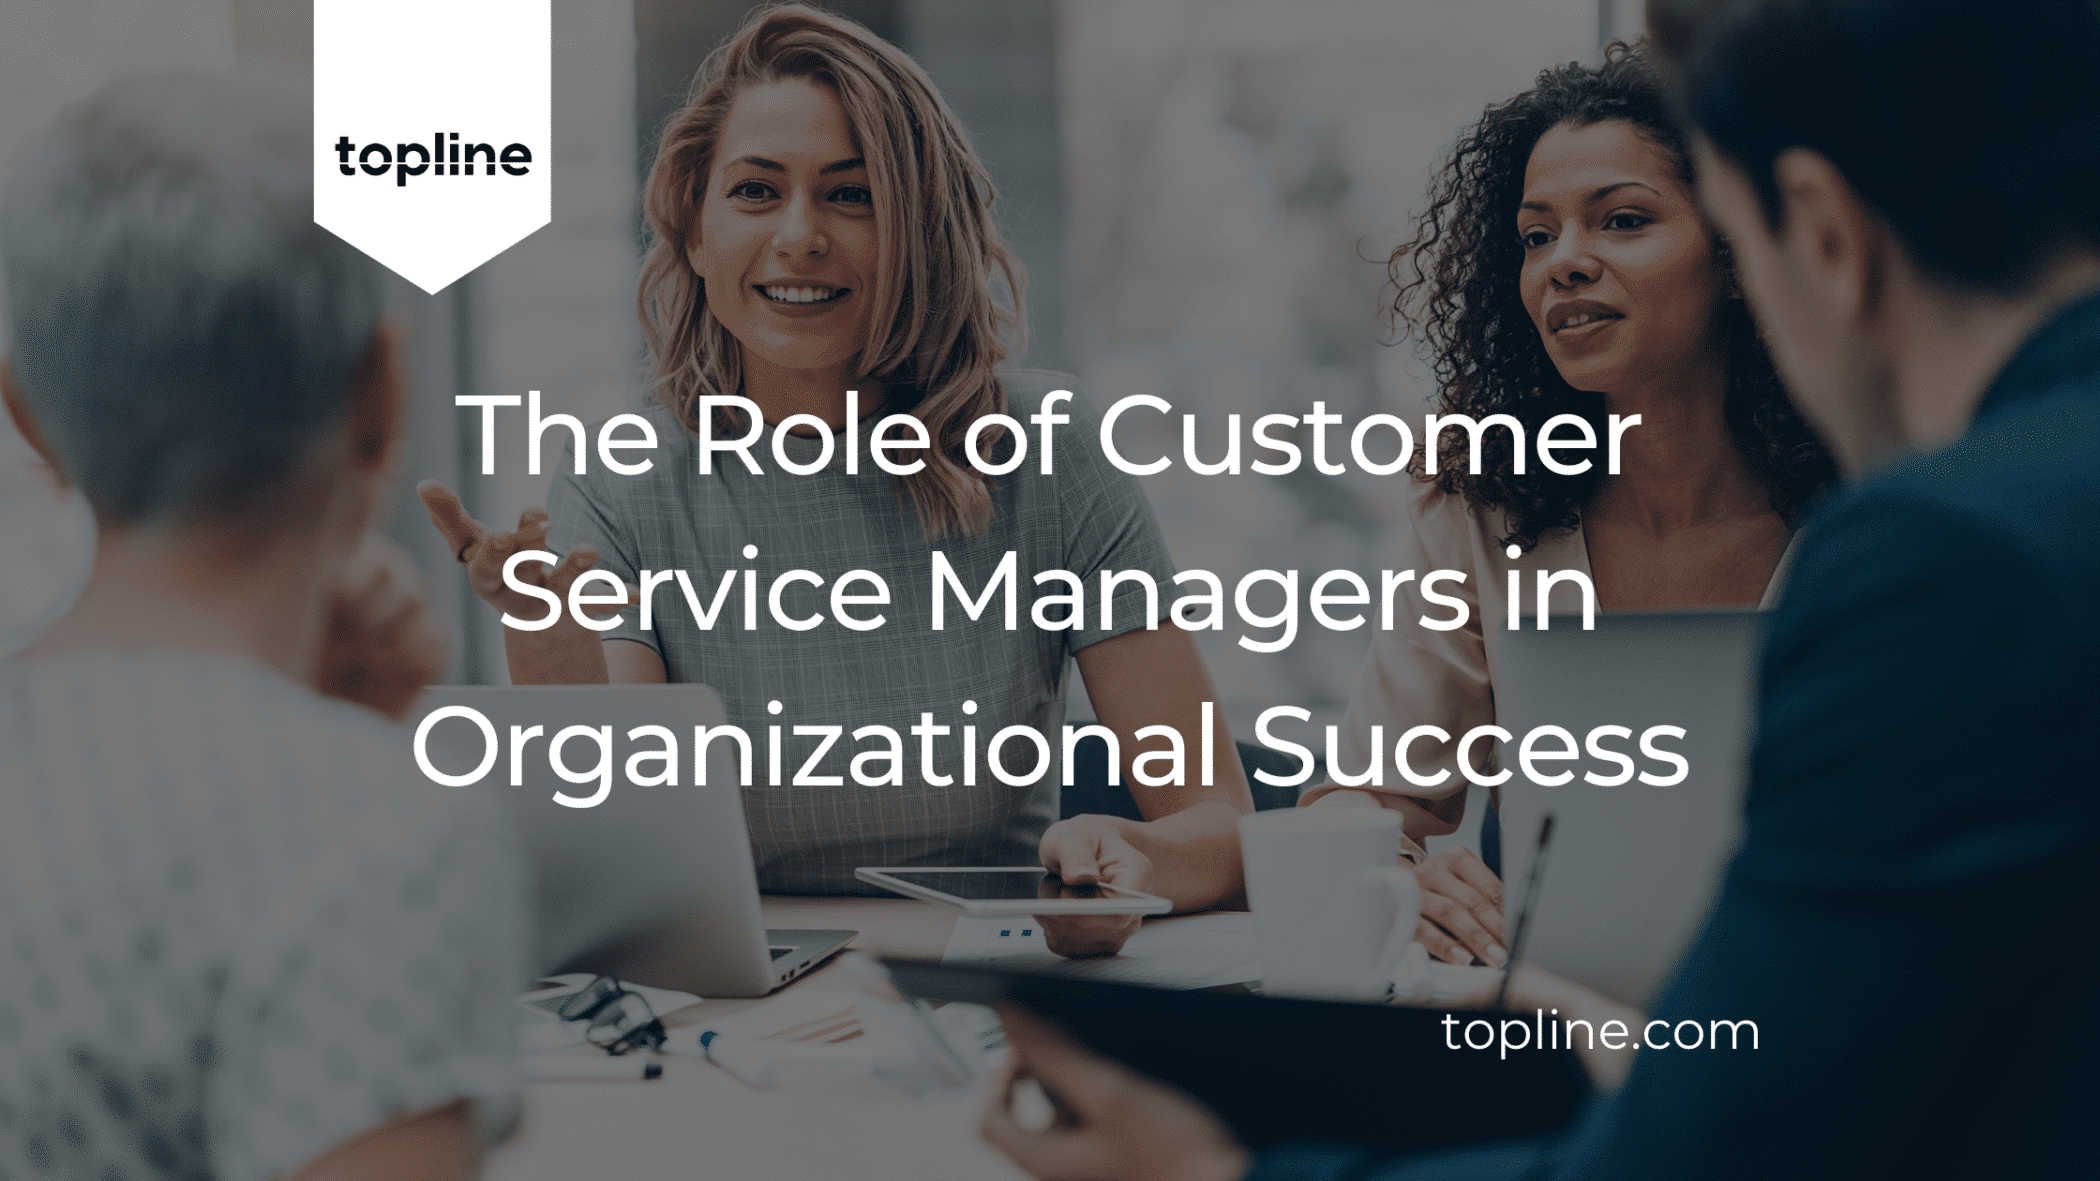 The Indispensable Role of Customer Service Managers in Organizational Success